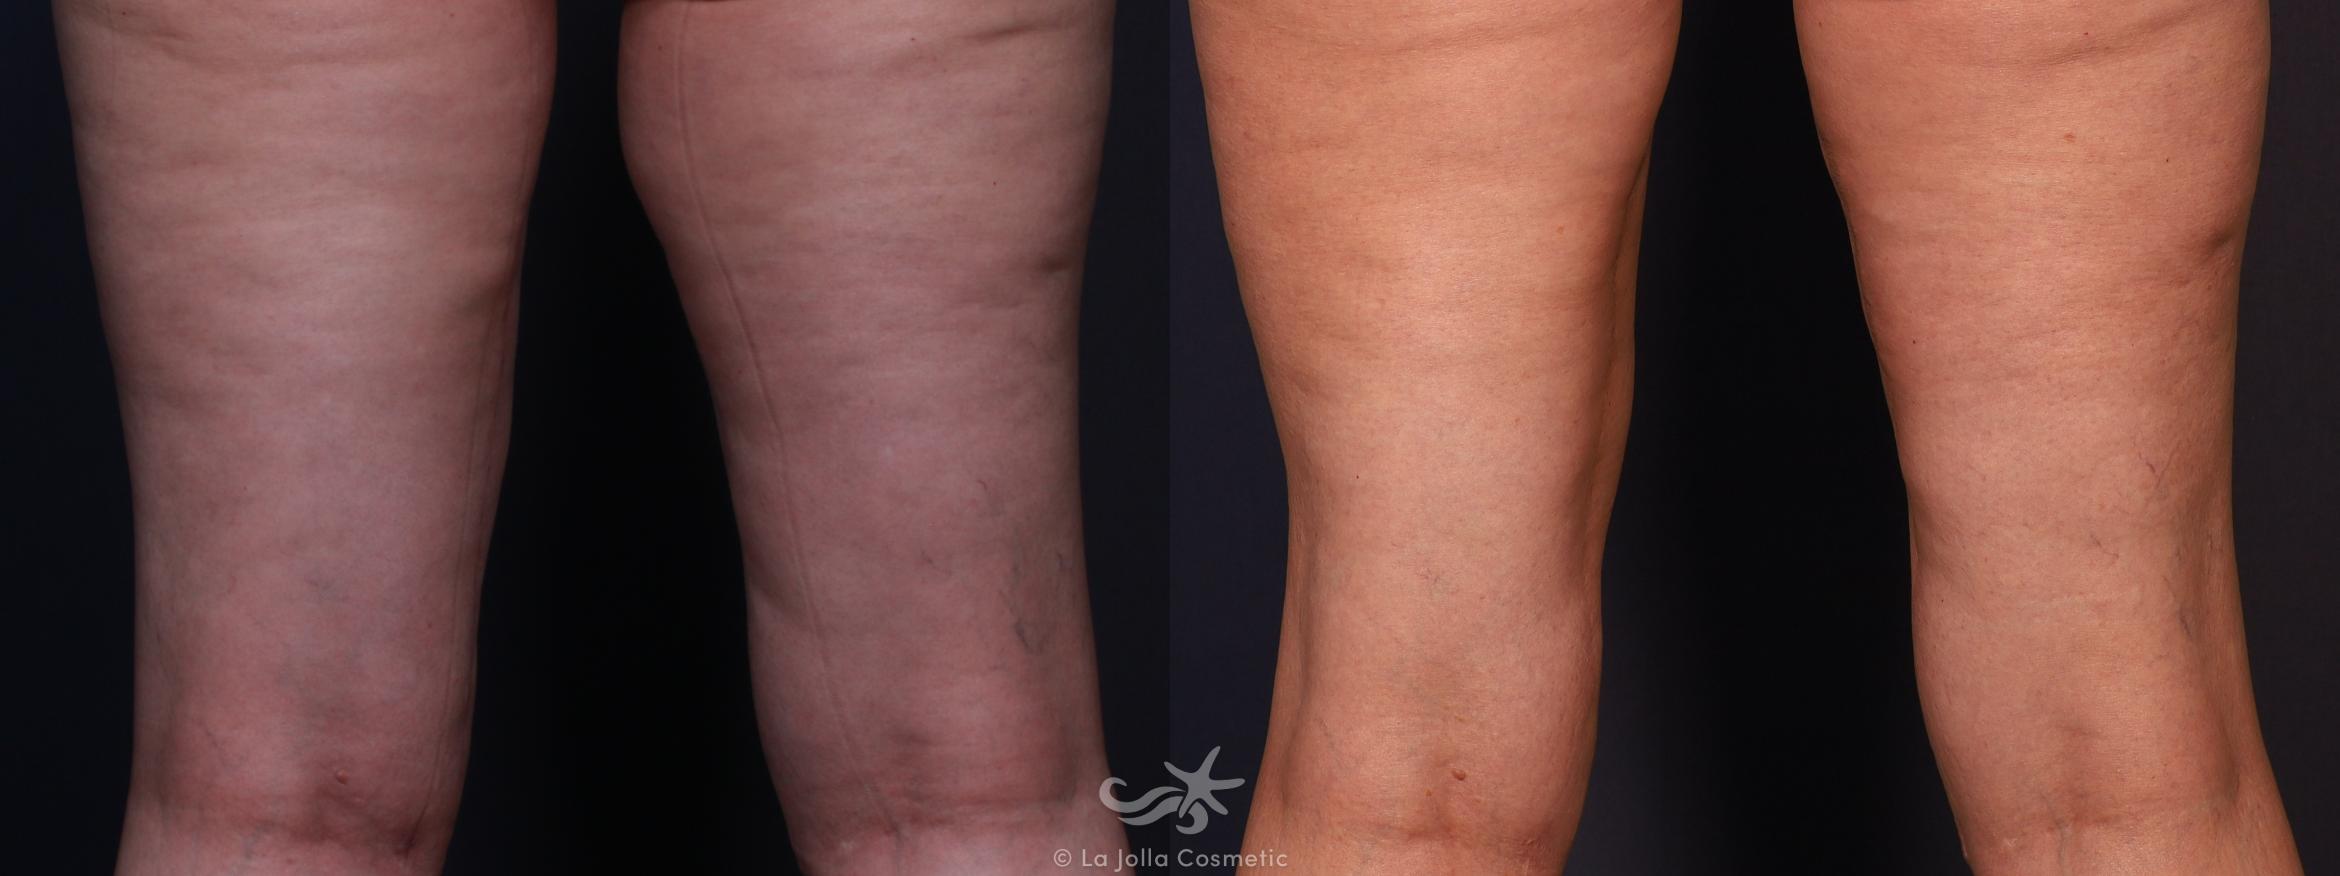 Before & After Liposuction Result 704 Back View in San Diego, CA